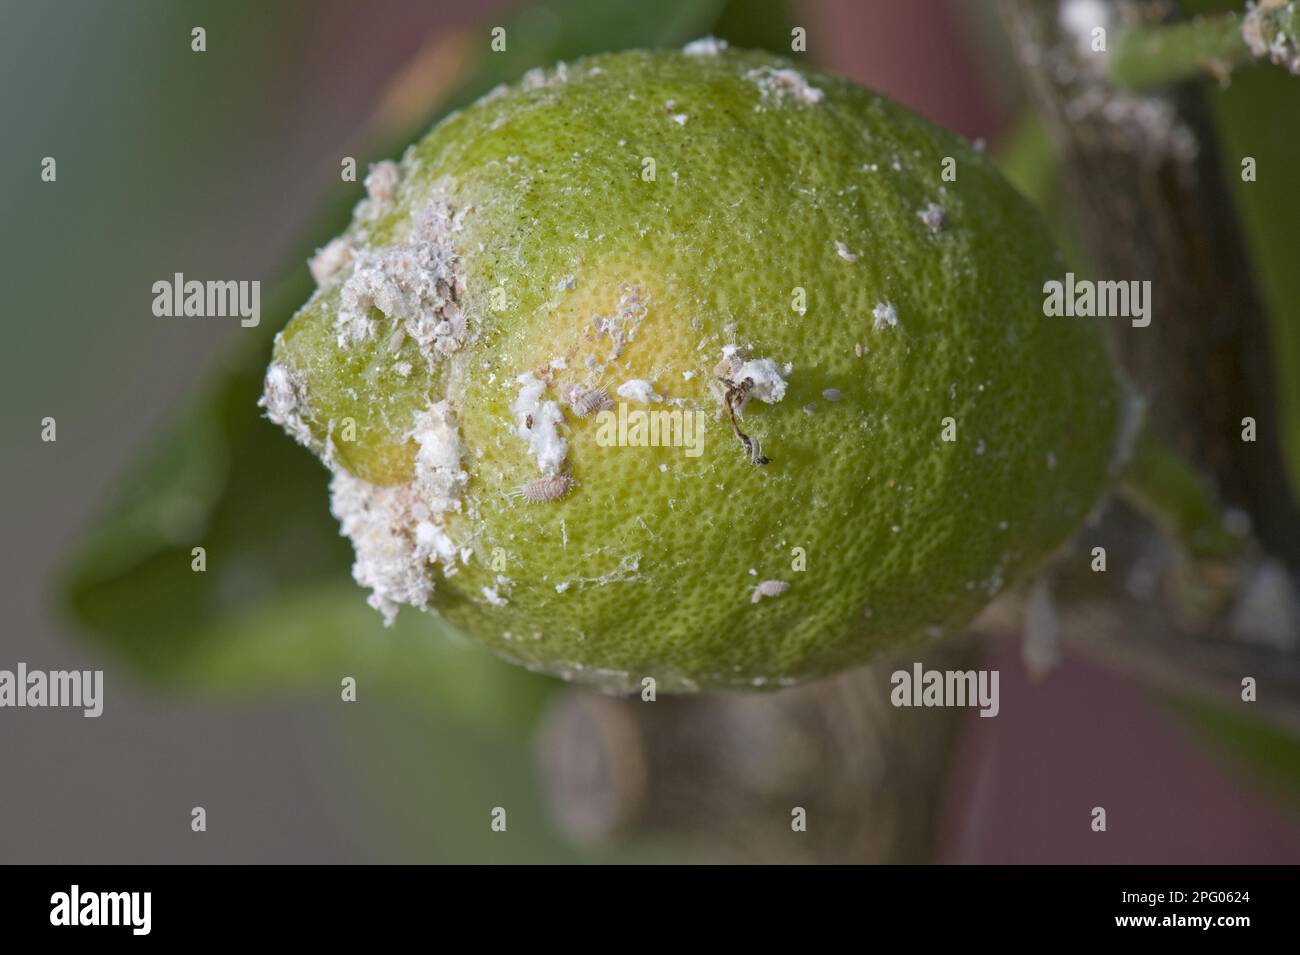 Greenhouse mealybug, Pseudococcus viburni, infestation of a lemon tree grown in the conservatory with fruits Stock Photo